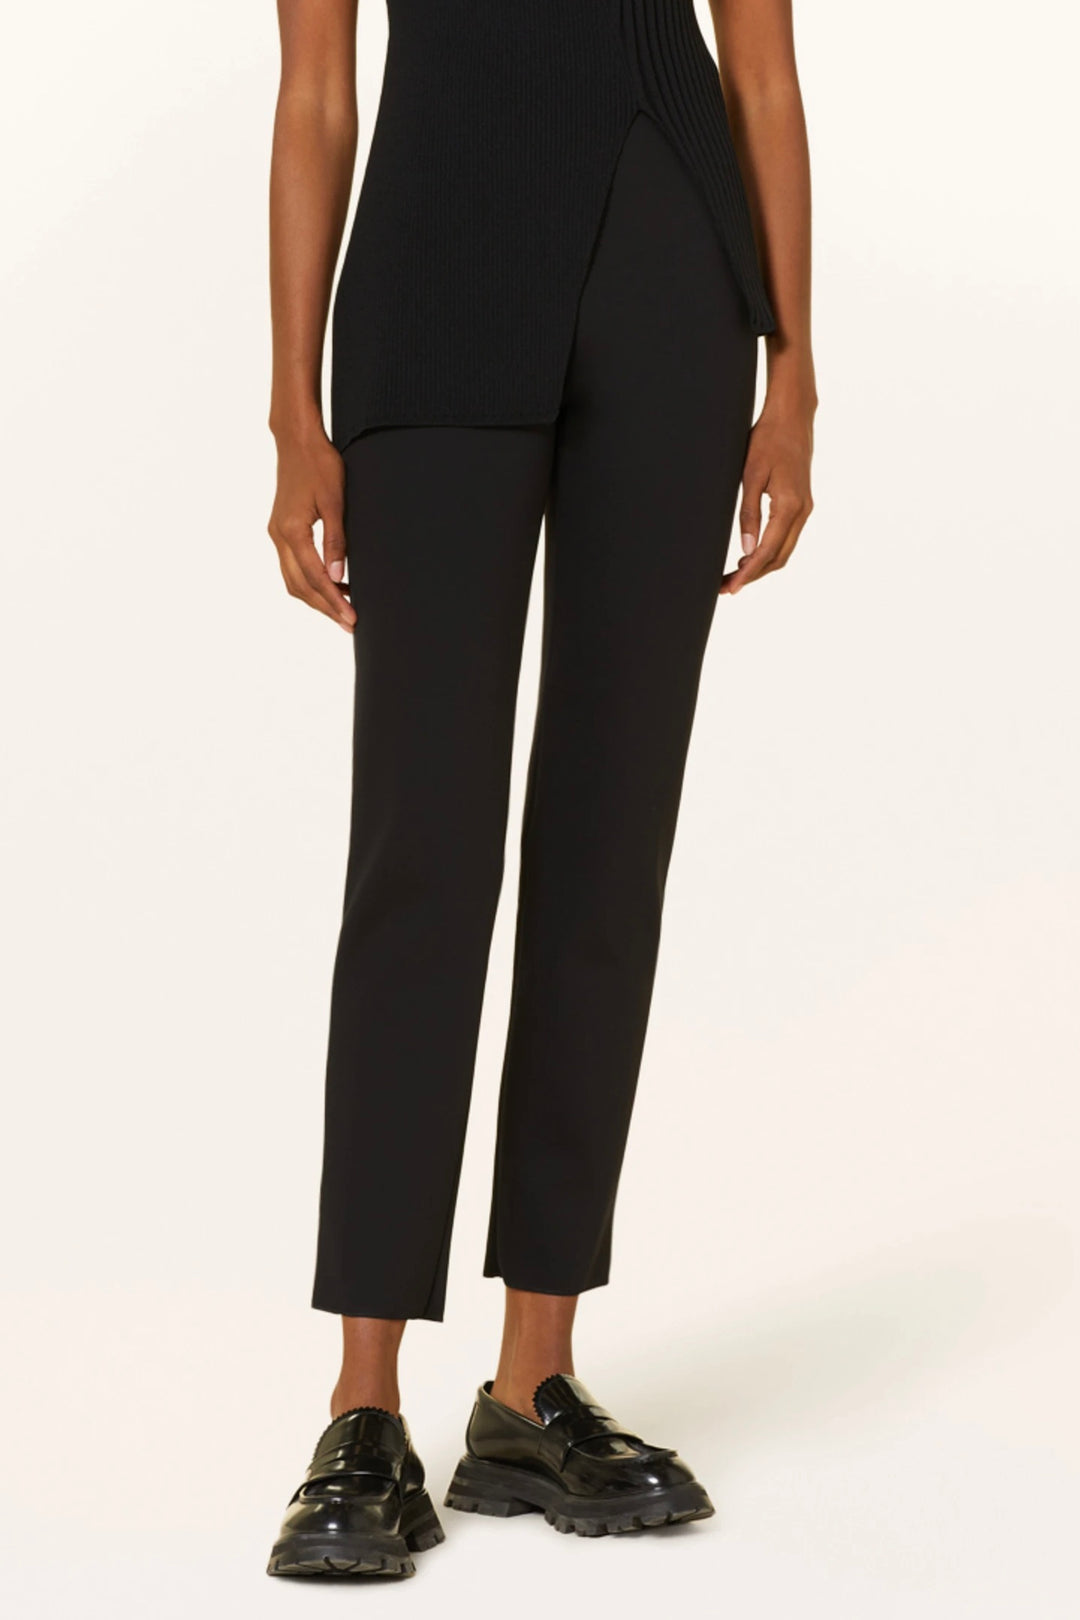 SONNI JERSEY TROUSER